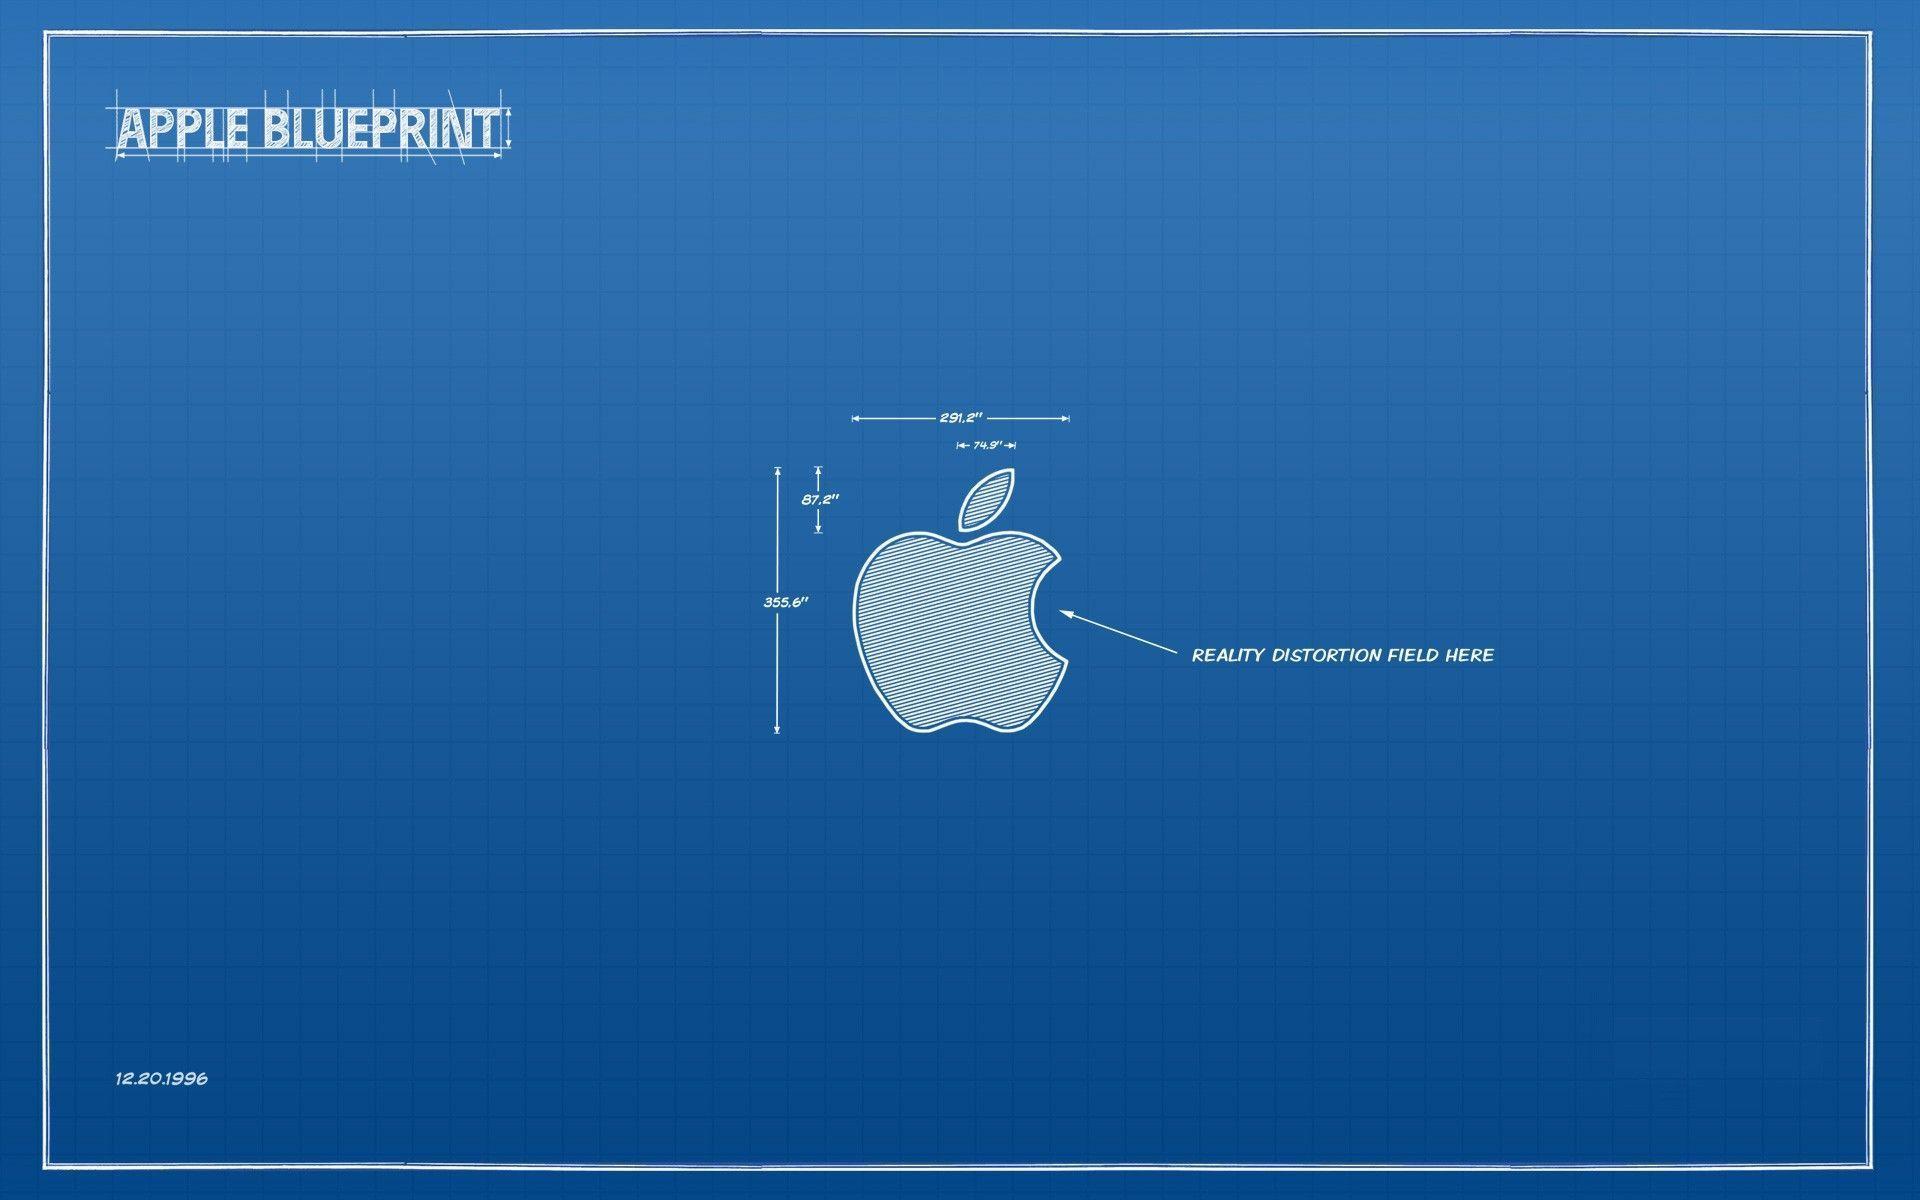 Apple blueprint wallpaper and image, picture, photo